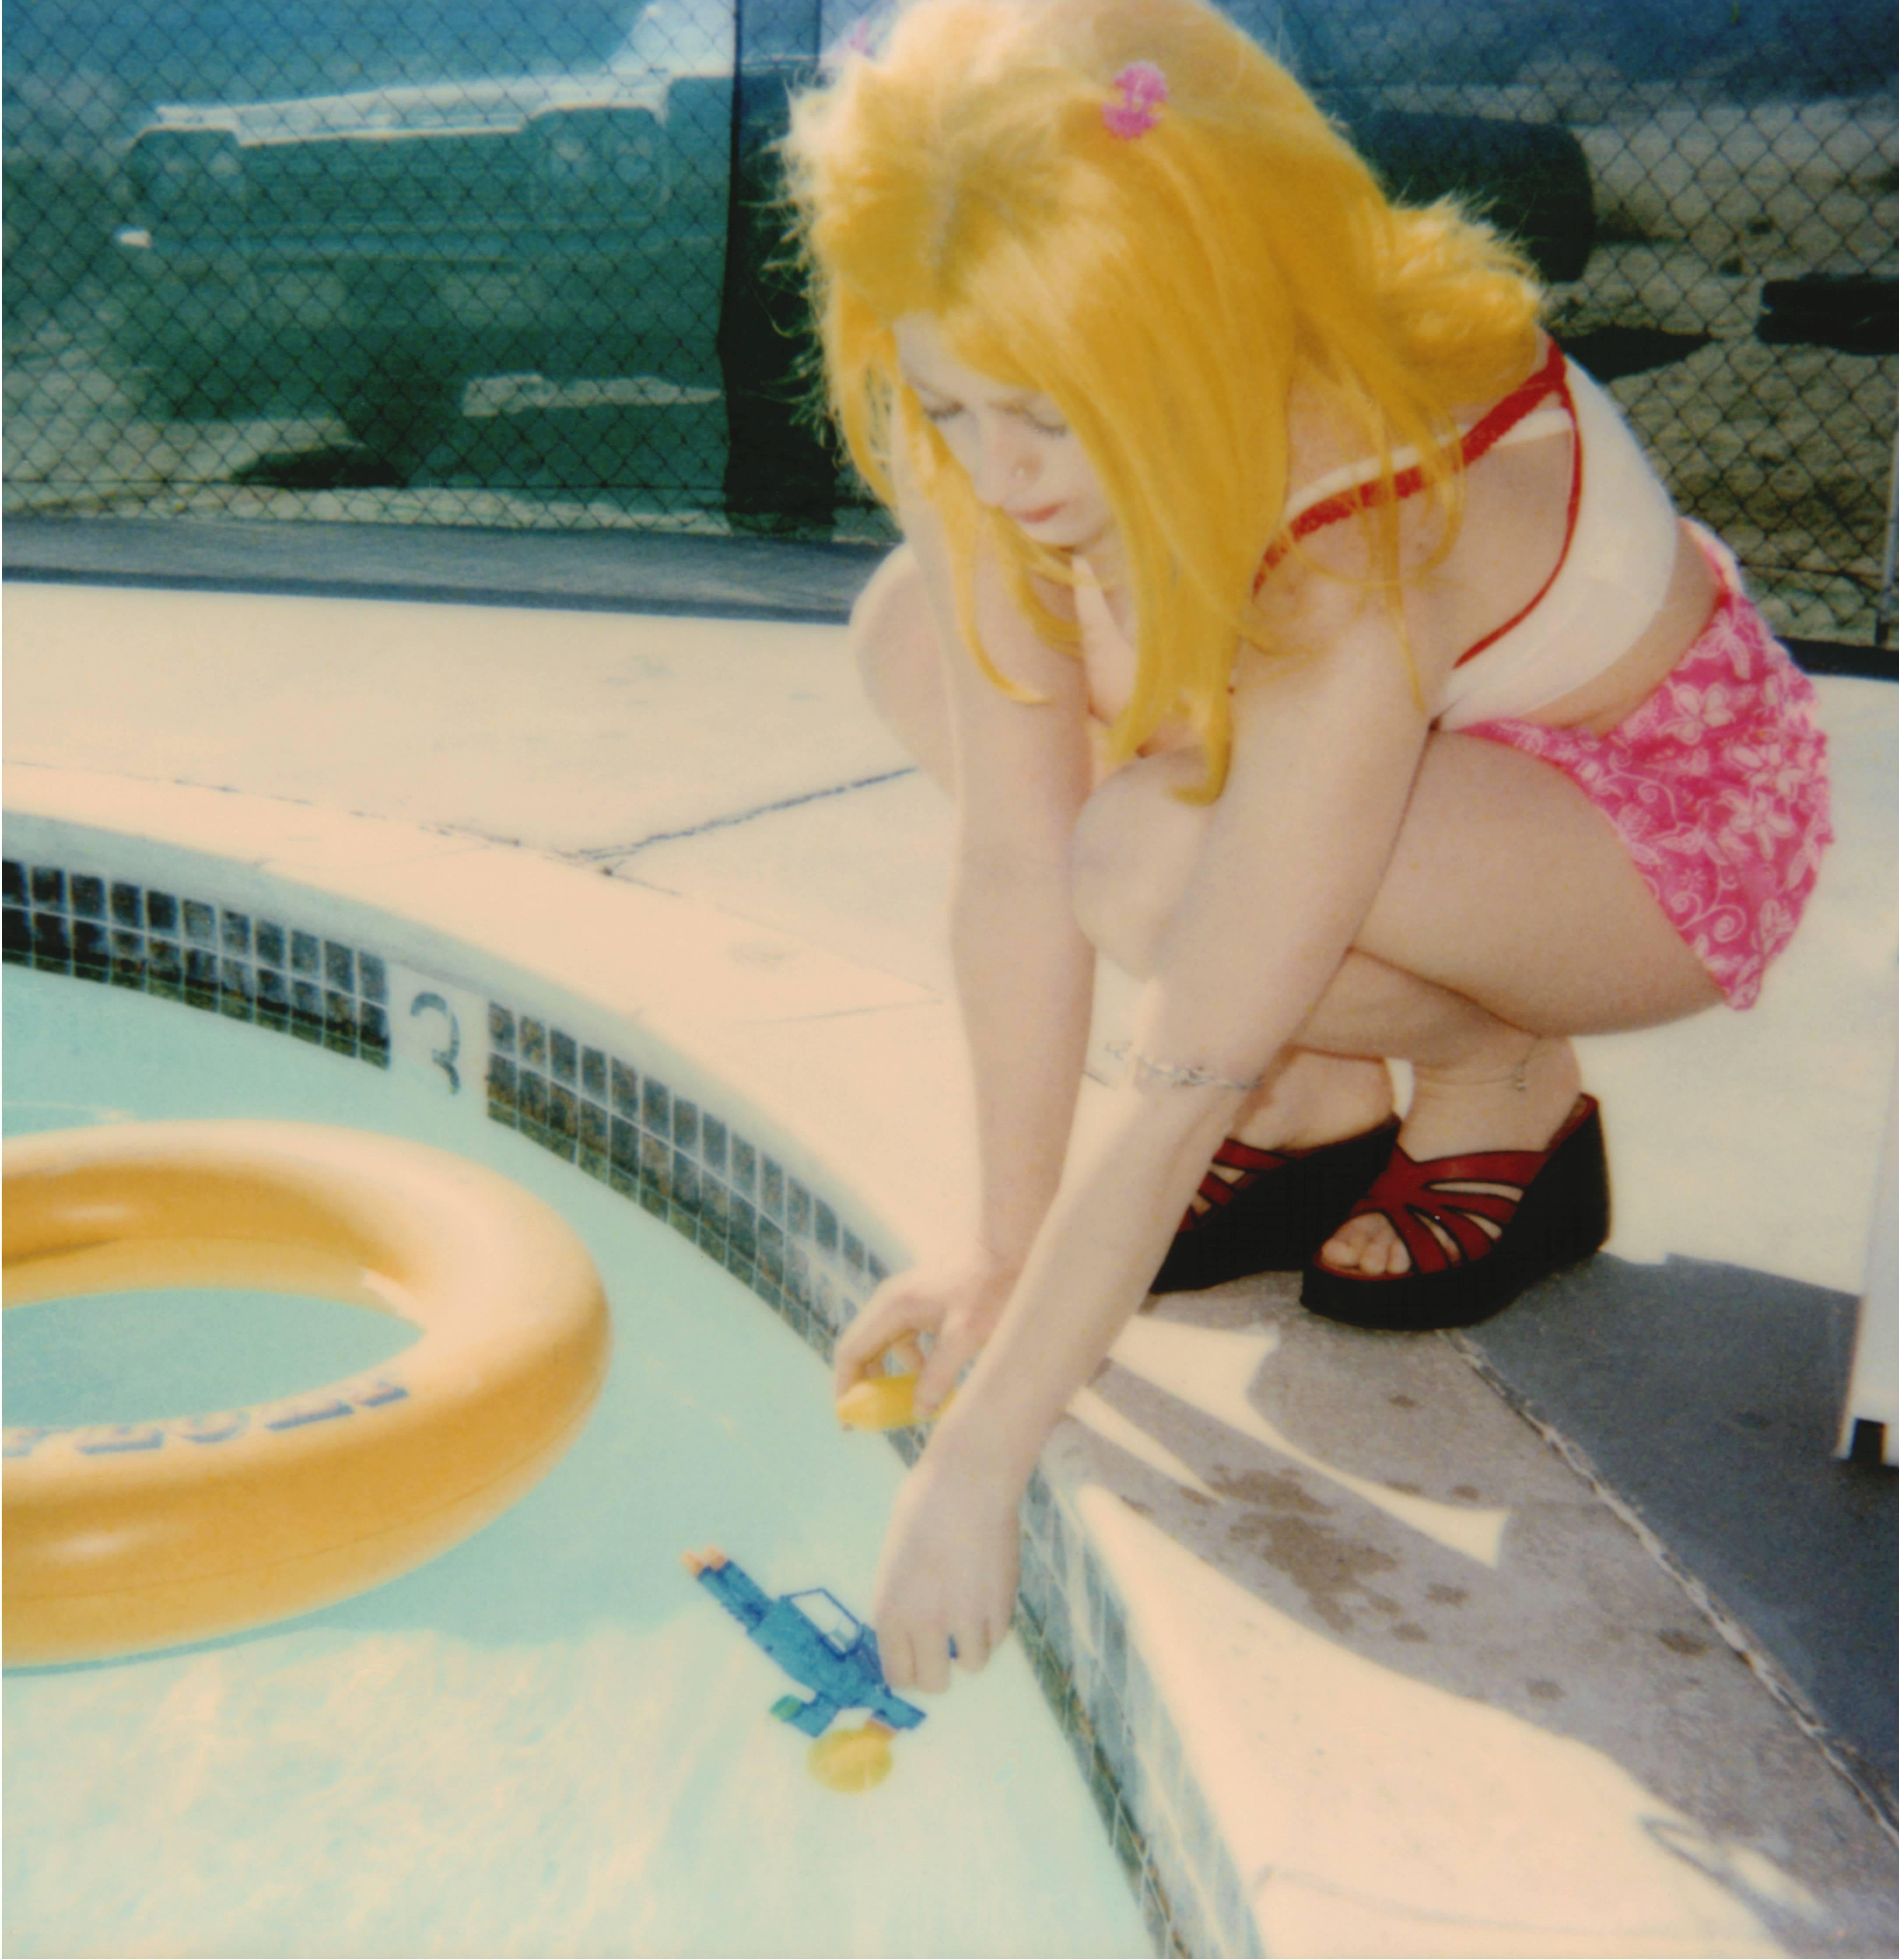 Max by the Pool (29 Palms, CA) analog, mounted - Contemporary Photograph by Stefanie Schneider